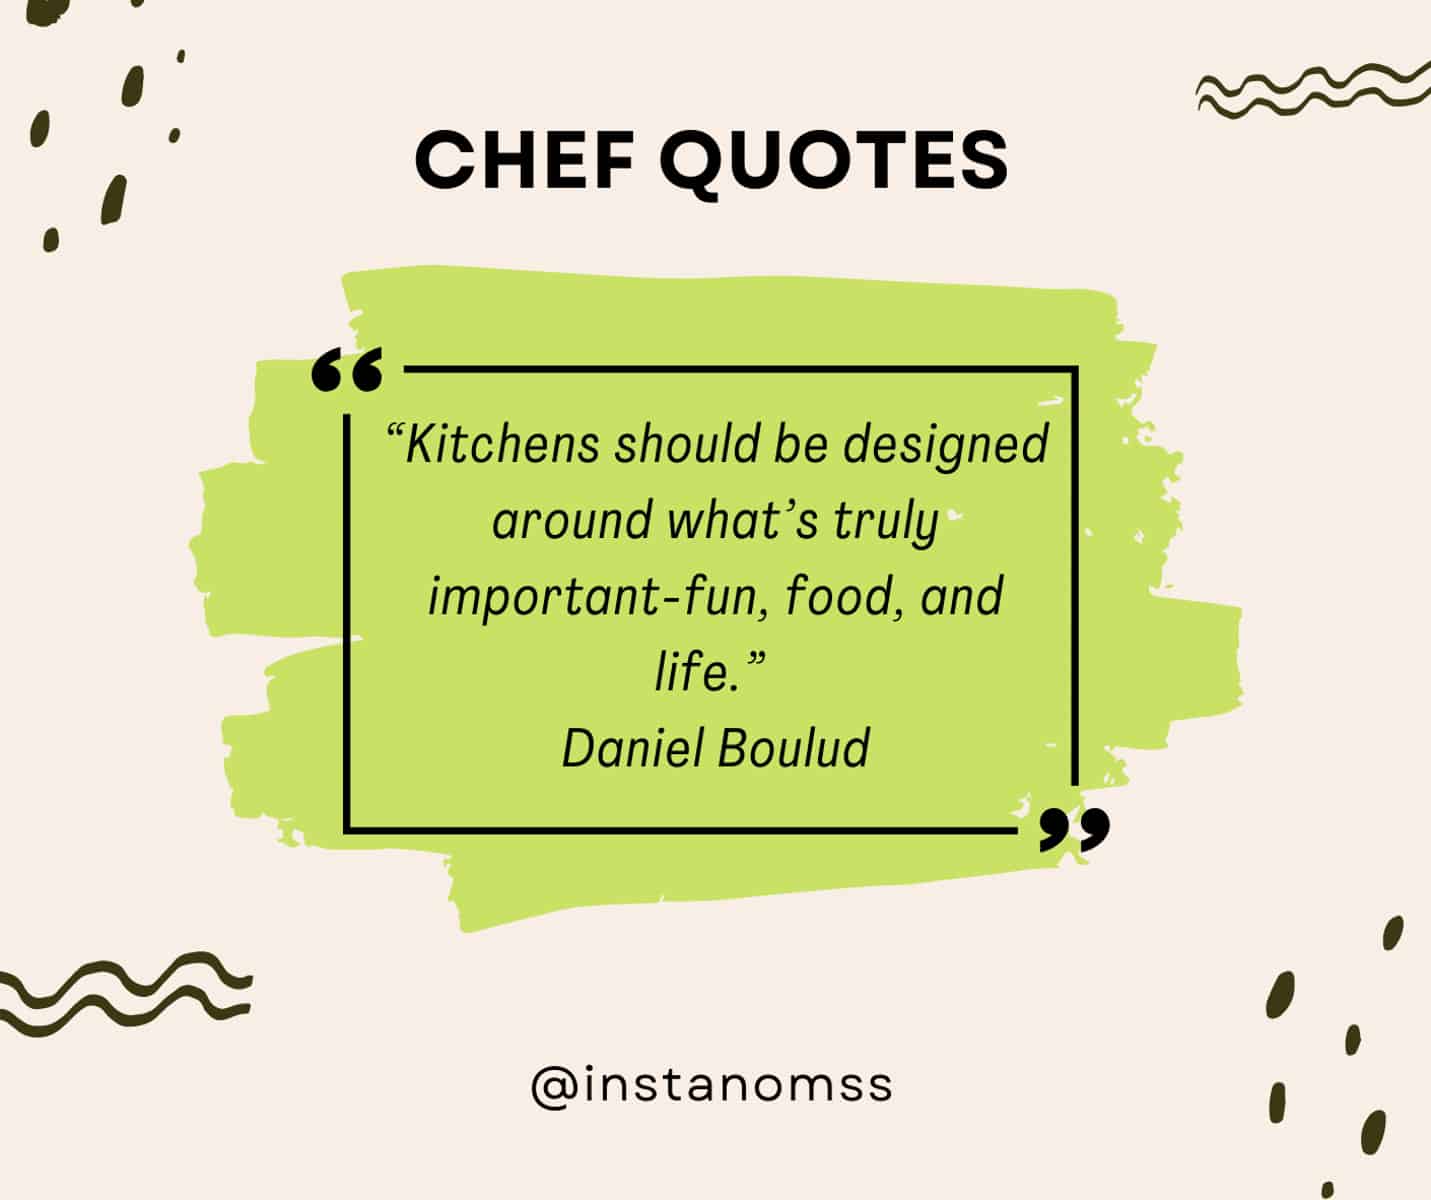 “Kitchens should be designed around what’s truly important-fun, food, and life.” Daniel Boulud